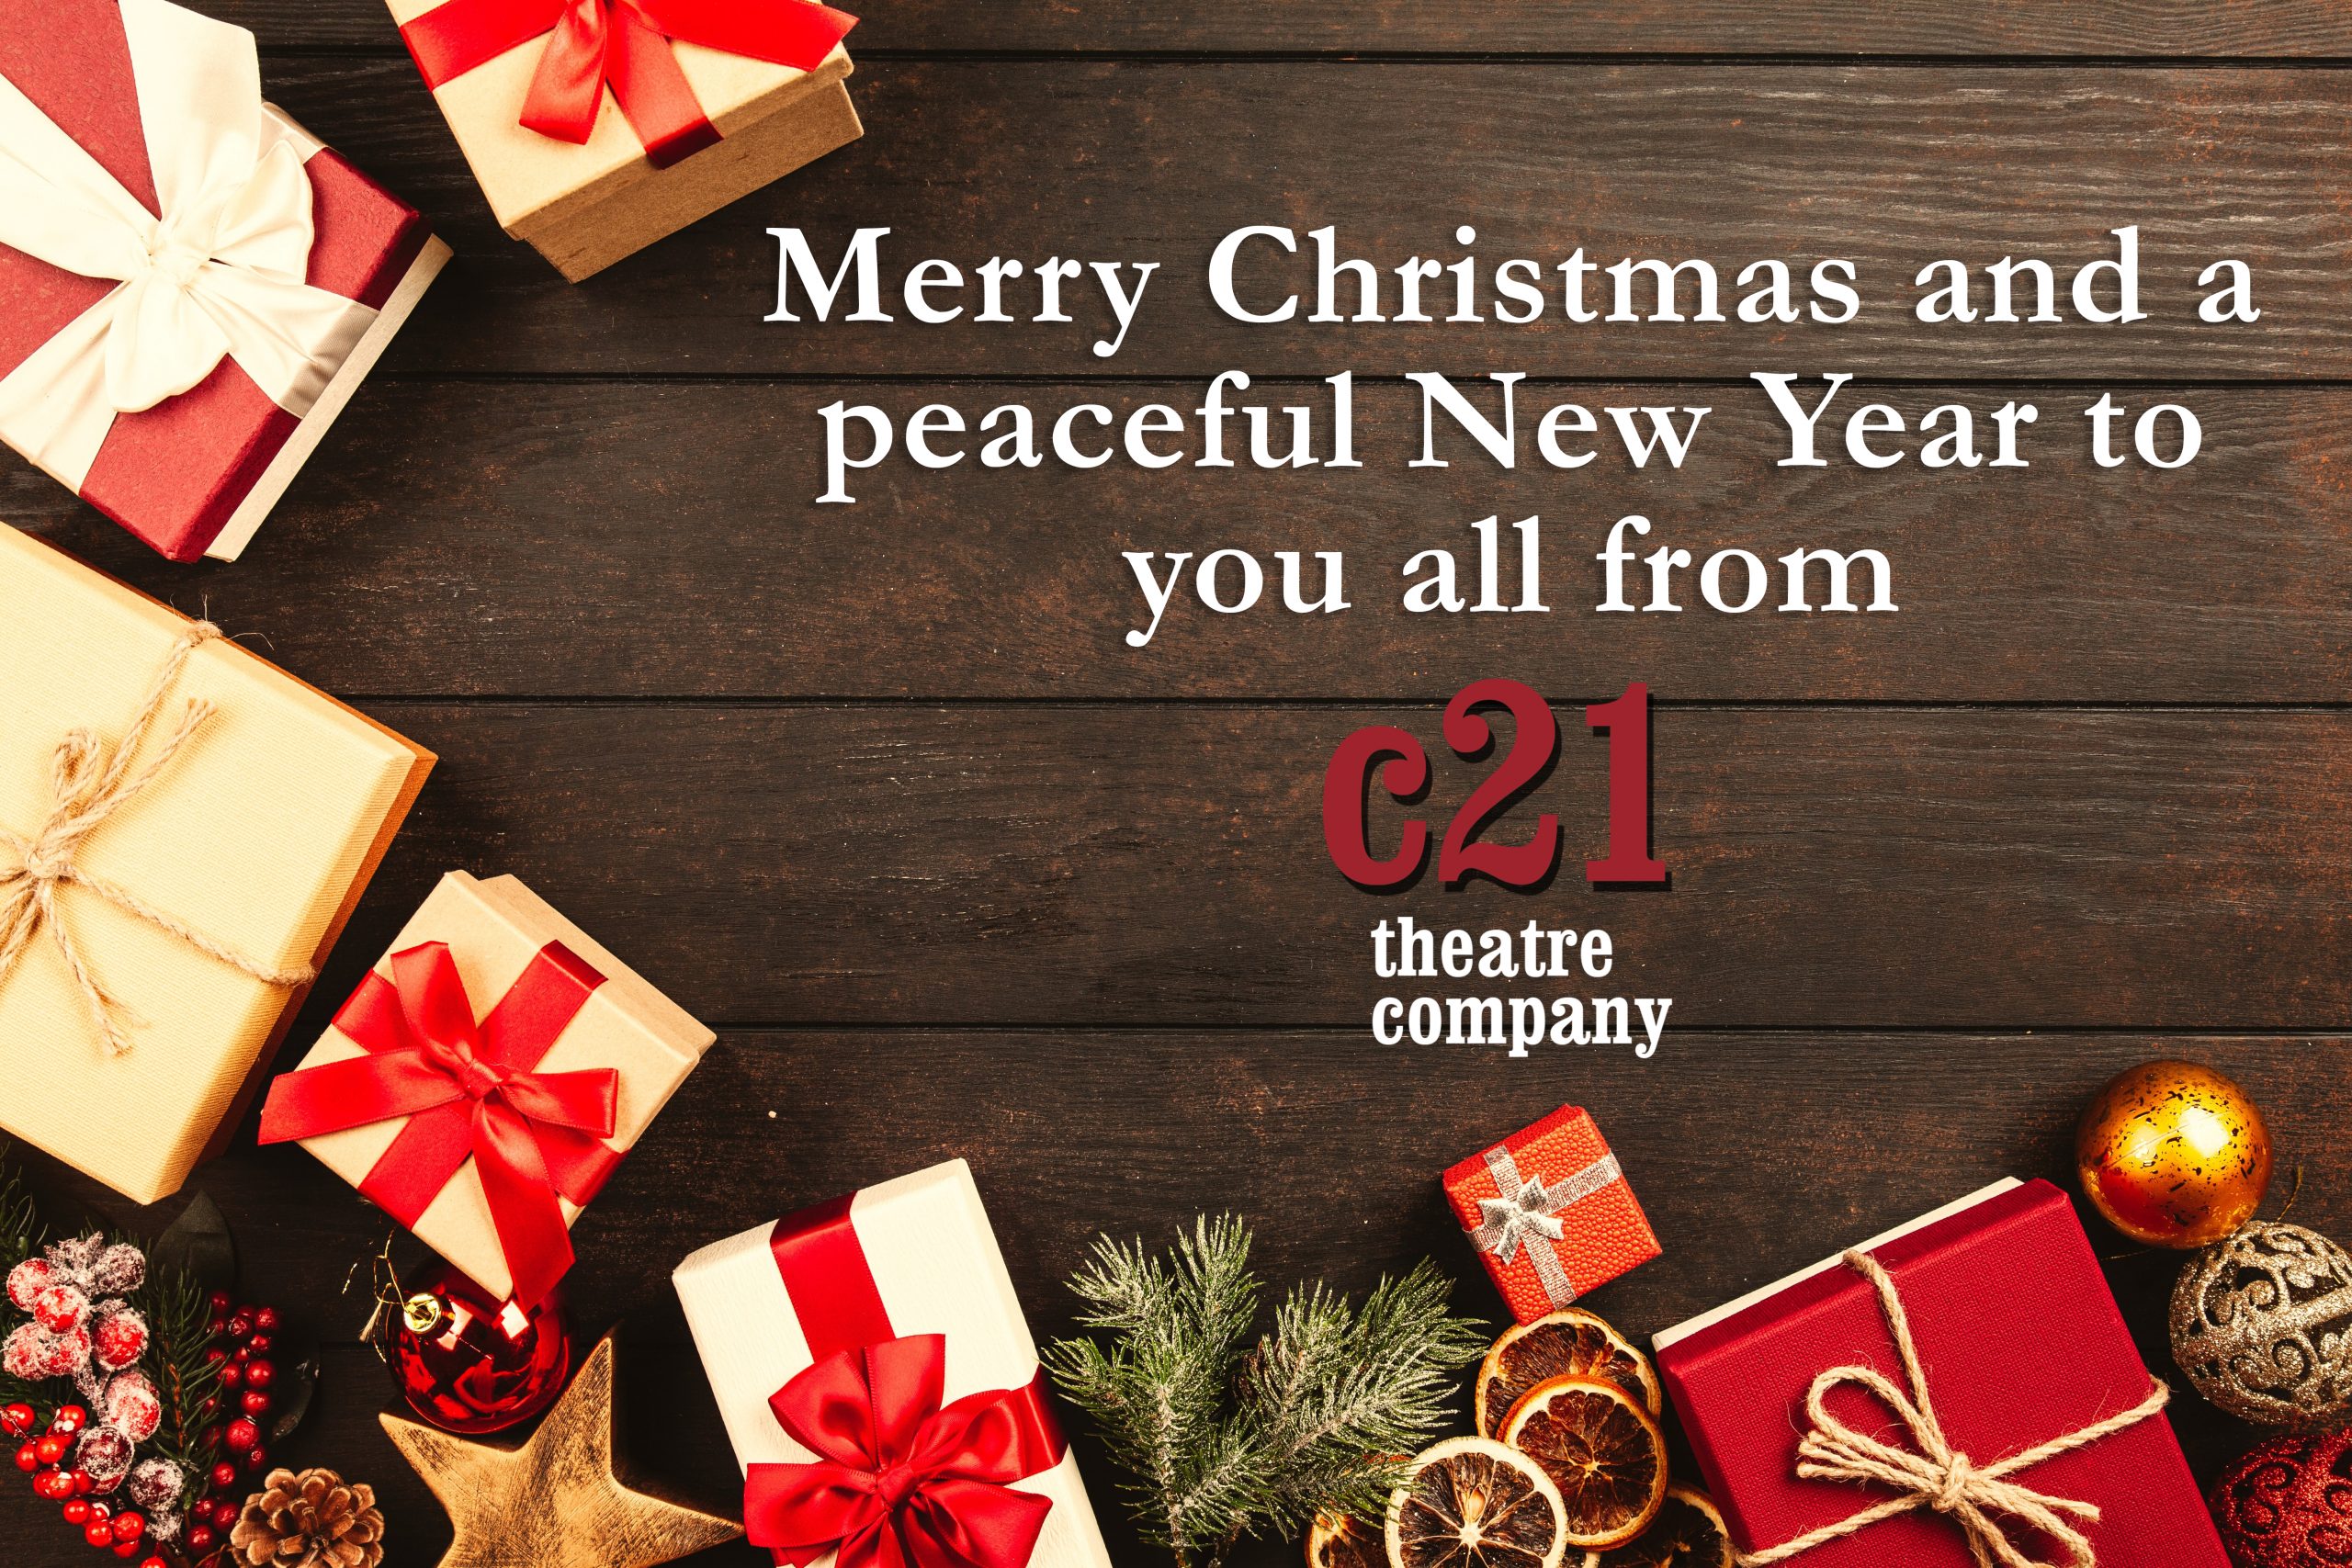 Happy Christmas from c21 Theatre Company